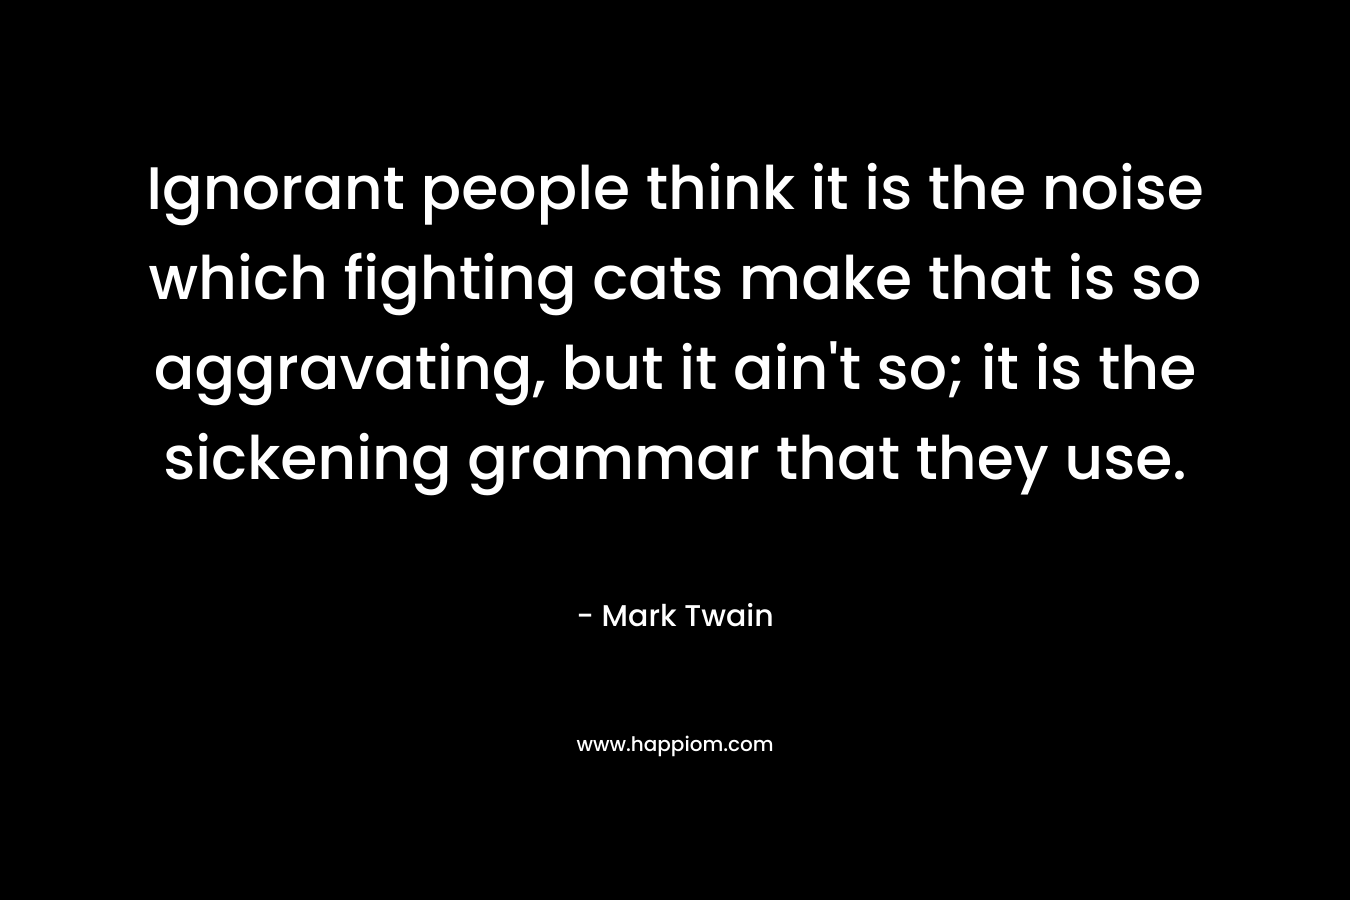 Ignorant people think it is the noise which fighting cats make that is so aggravating, but it ain’t so; it is the sickening grammar that they use. – Mark Twain